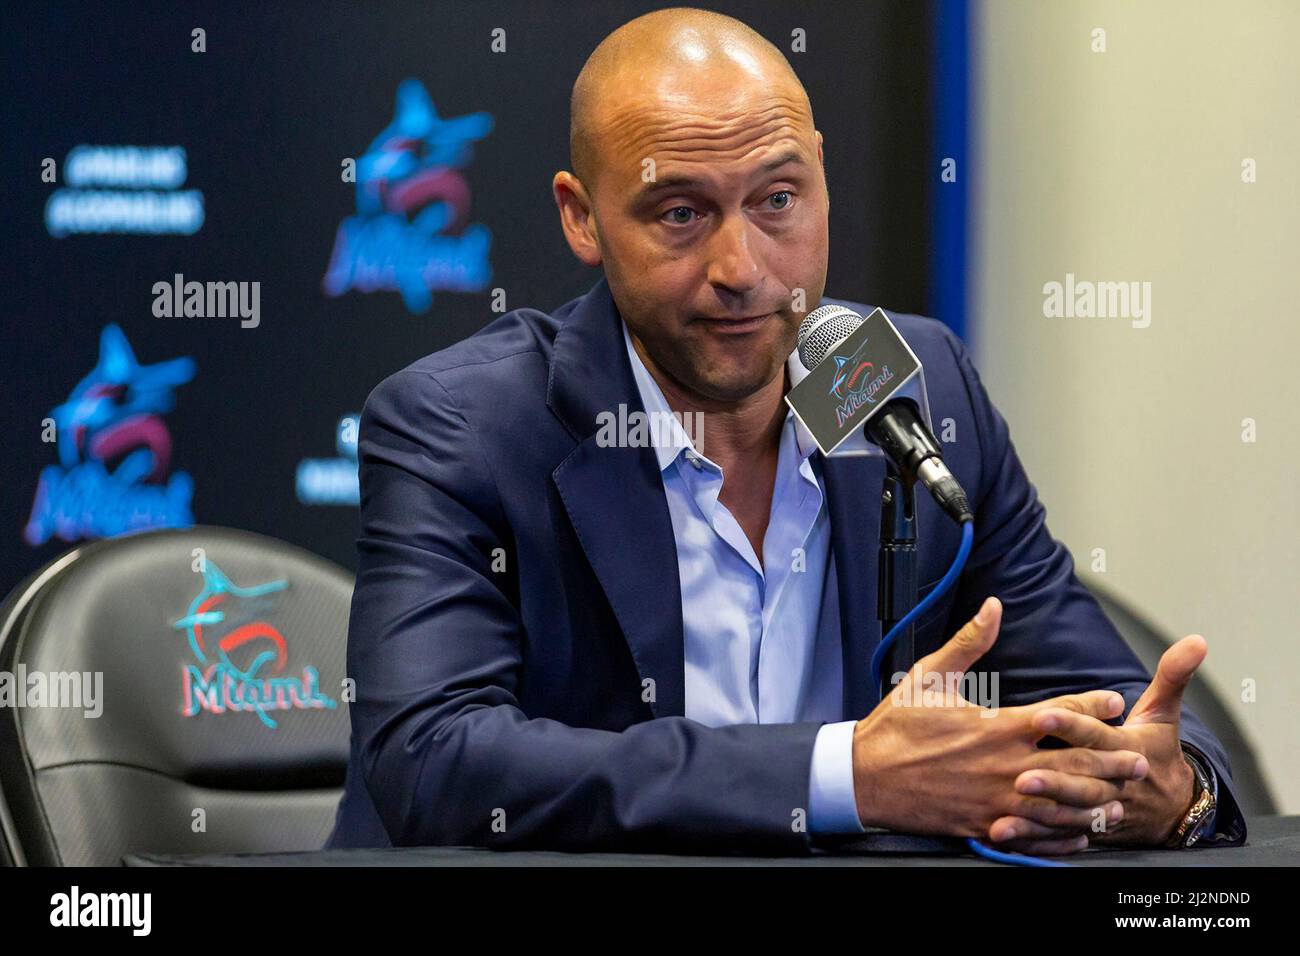 Miami, USA. 20th Sep, 2019. Derek Jeter, chief executive officer of the Miami Marlins, speaks during a news conference at Marlins Park in Miami on September 20, 2019. (Photo by Matias J. Ocner/Miami Herald/TNS/Sipa USA) Credit: Sipa USA/Alamy Live News Stock Photo